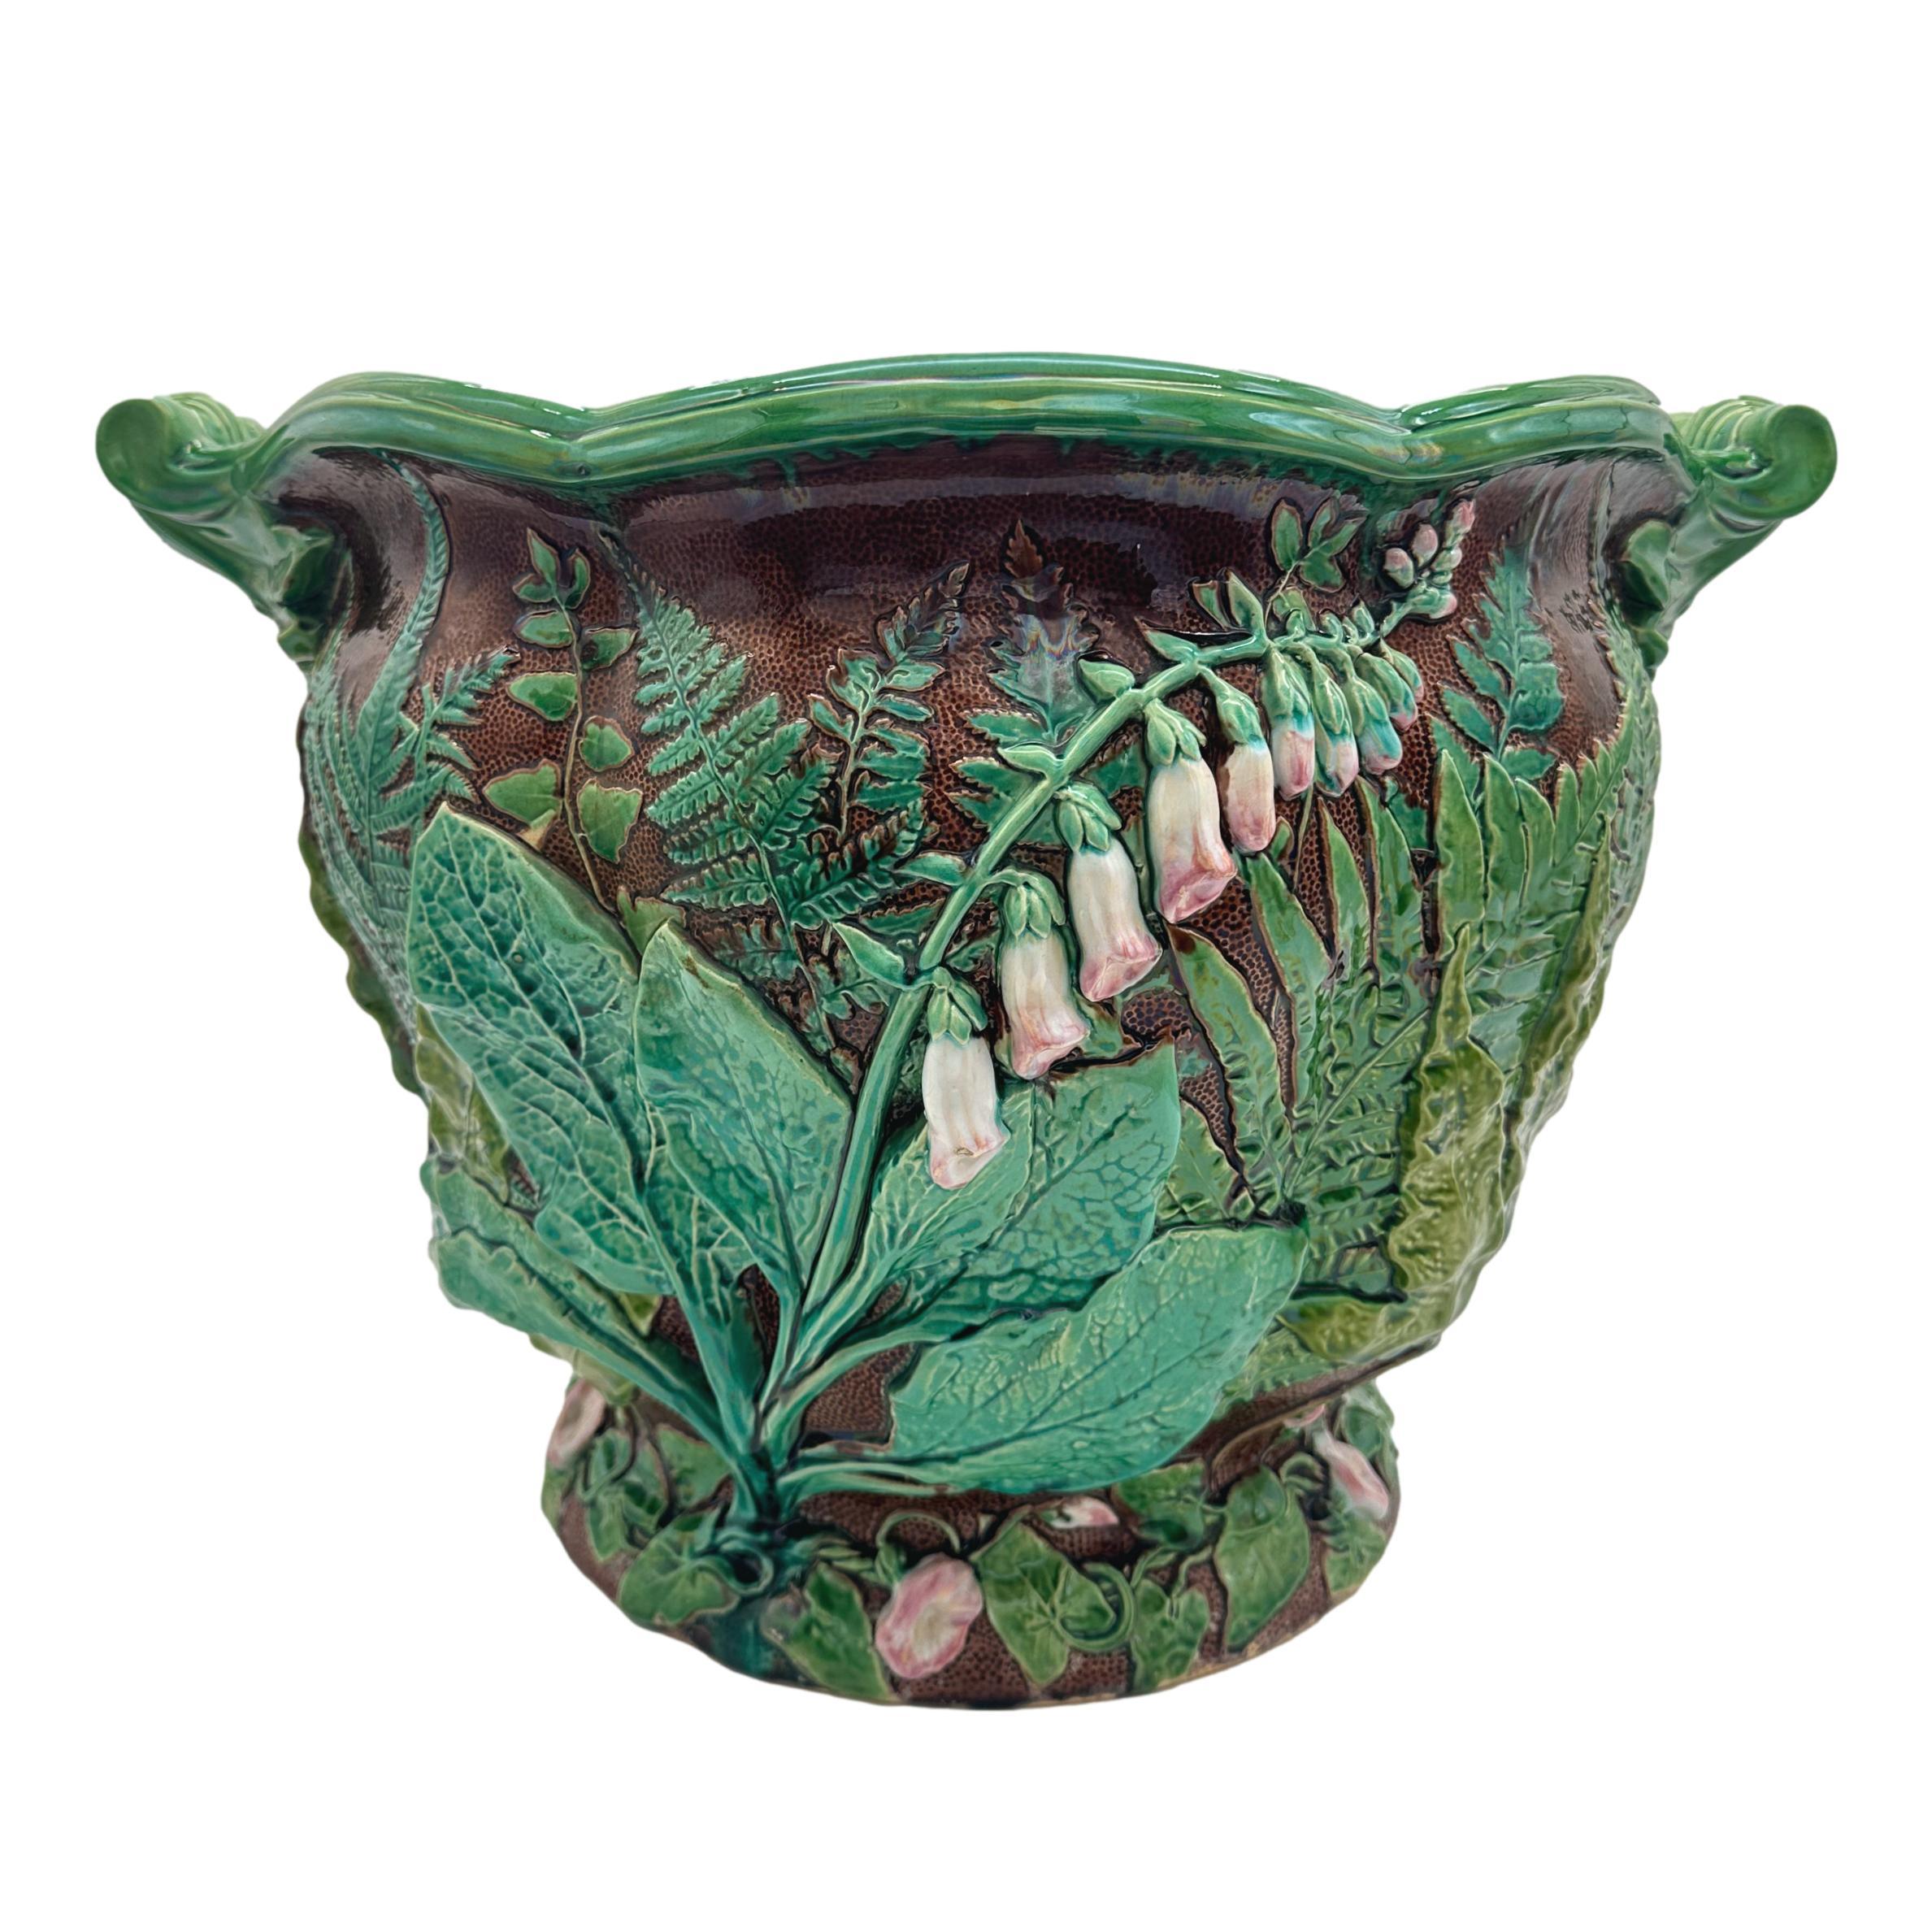 A Minton Majolica Foxglove Jardiniere and Stand, molded with naturalistic trompe l'oeil foxgloves, ferns, and morning glories on a rustic ground, with a shaped oval rim and foliate-scroll handles, the reverse glazed in pink with impressed marks: